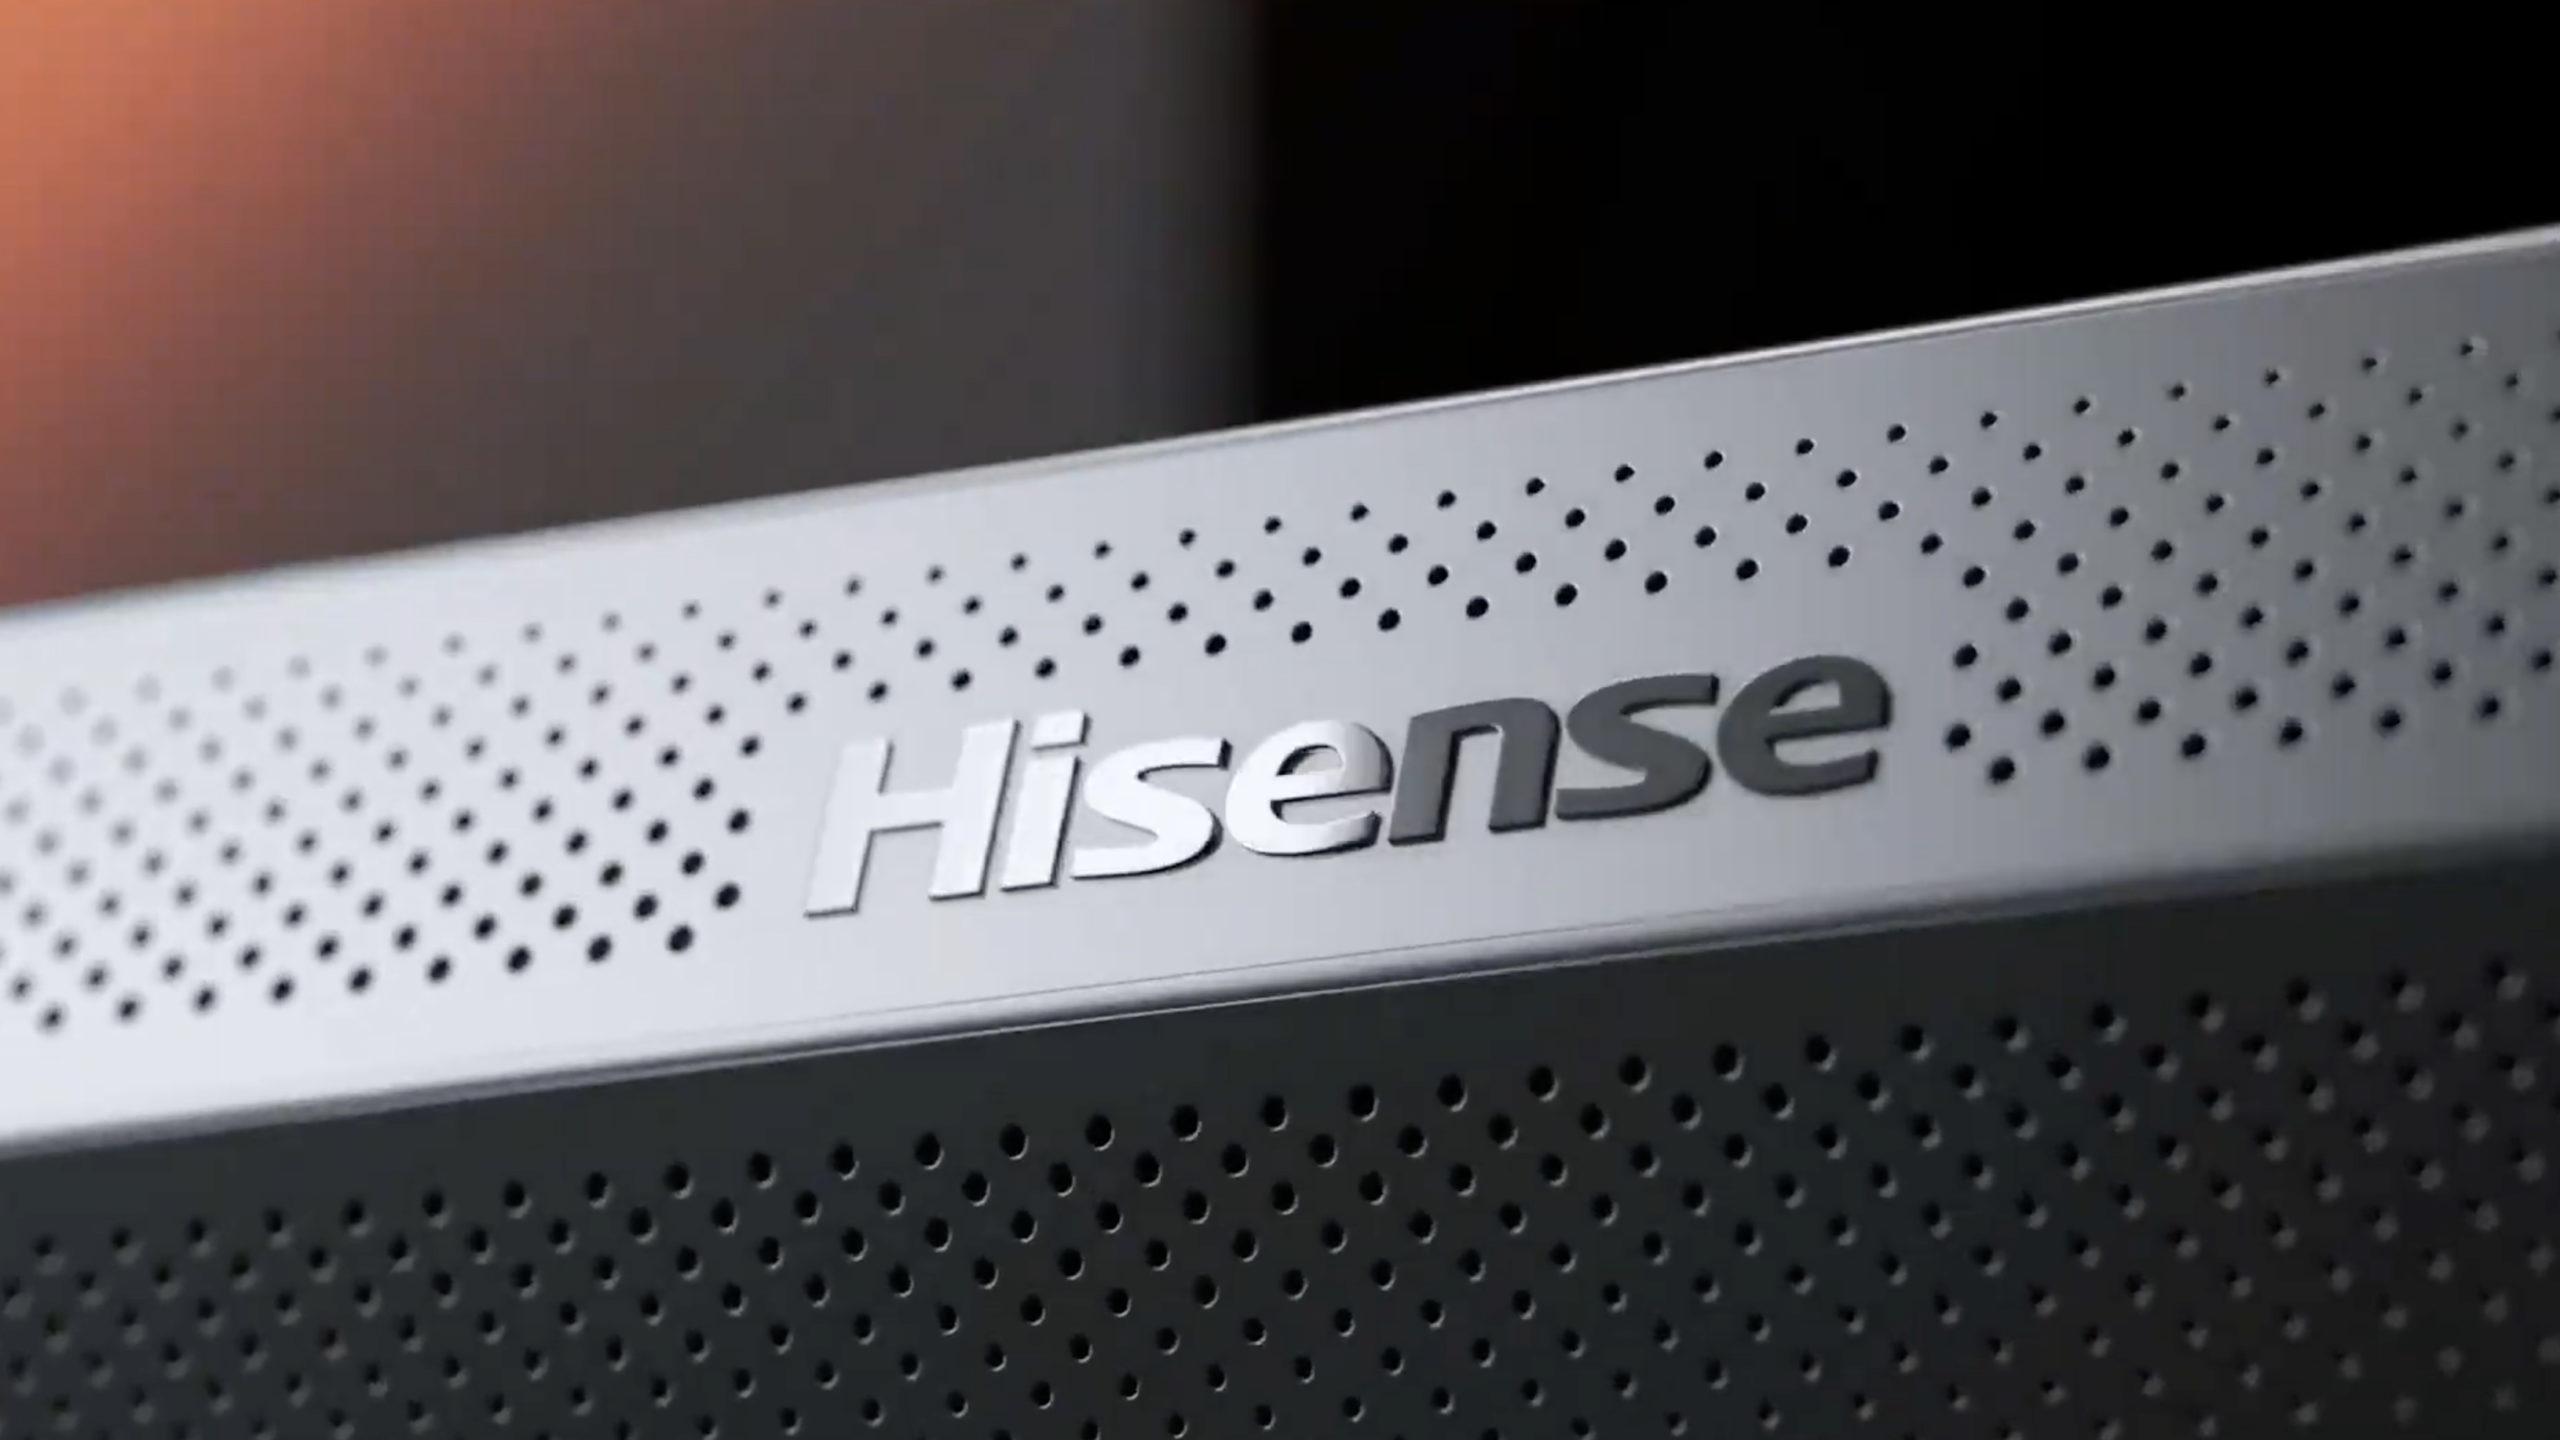 Hisense TV 2021: every Dual Cell, ULED and Laser TV you can buy